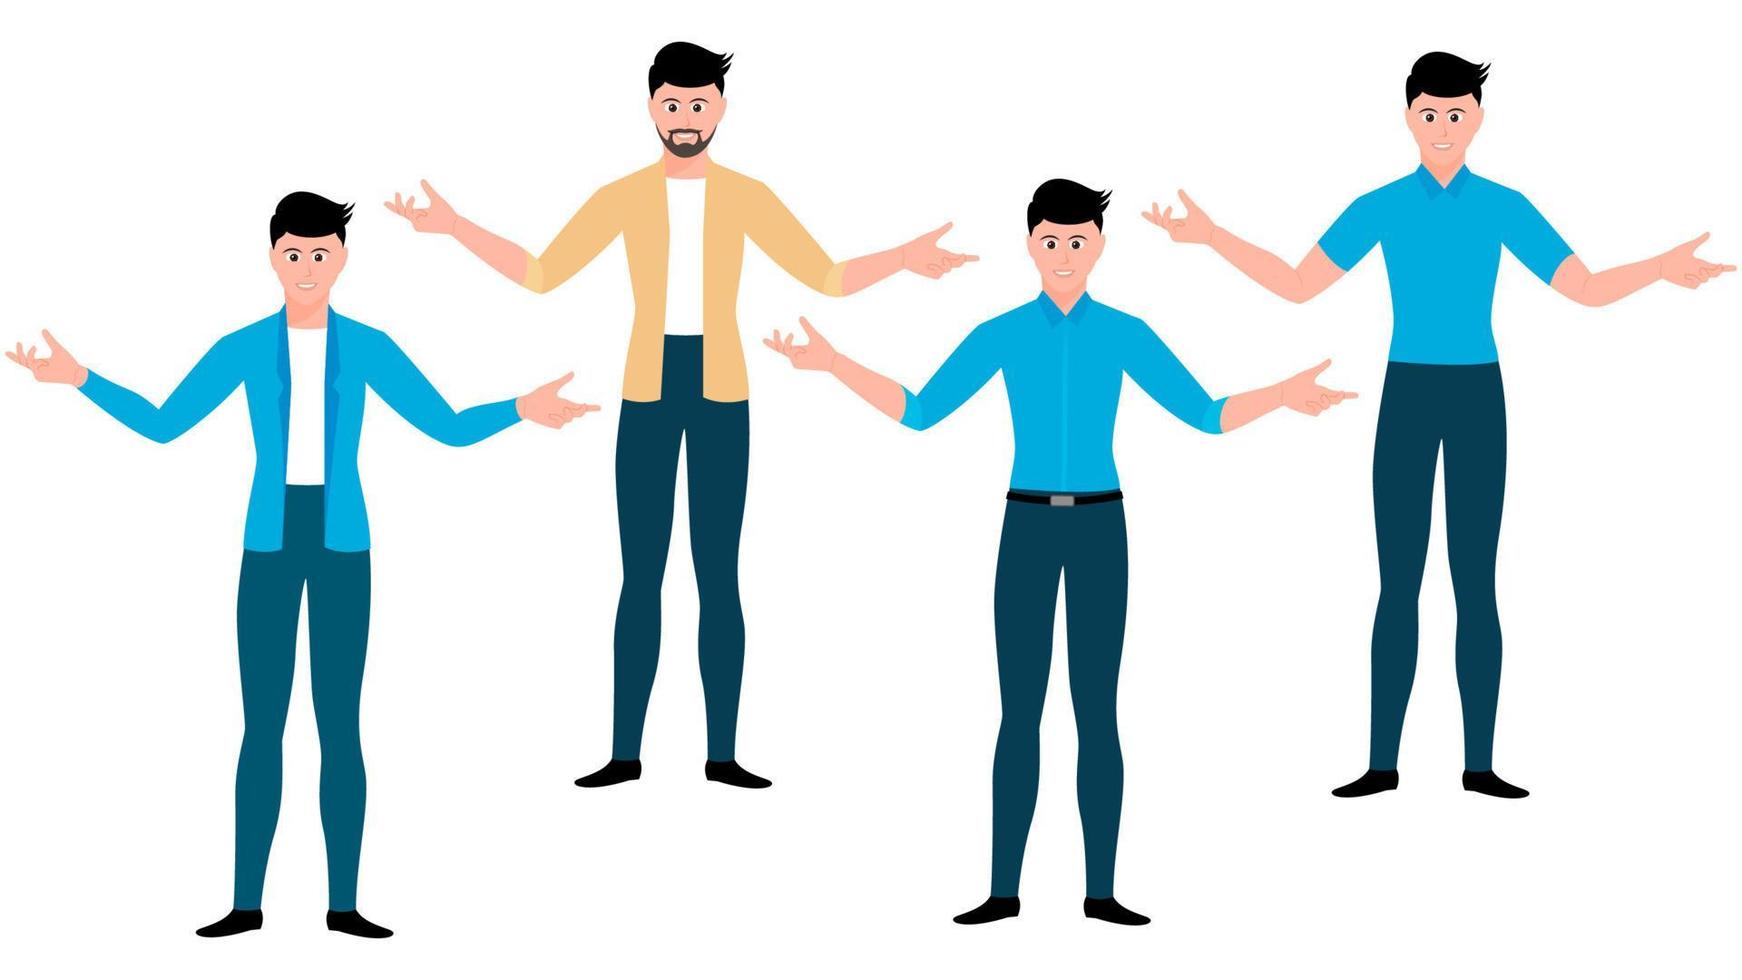 Man opening arms wide, flat character vector illustration set.